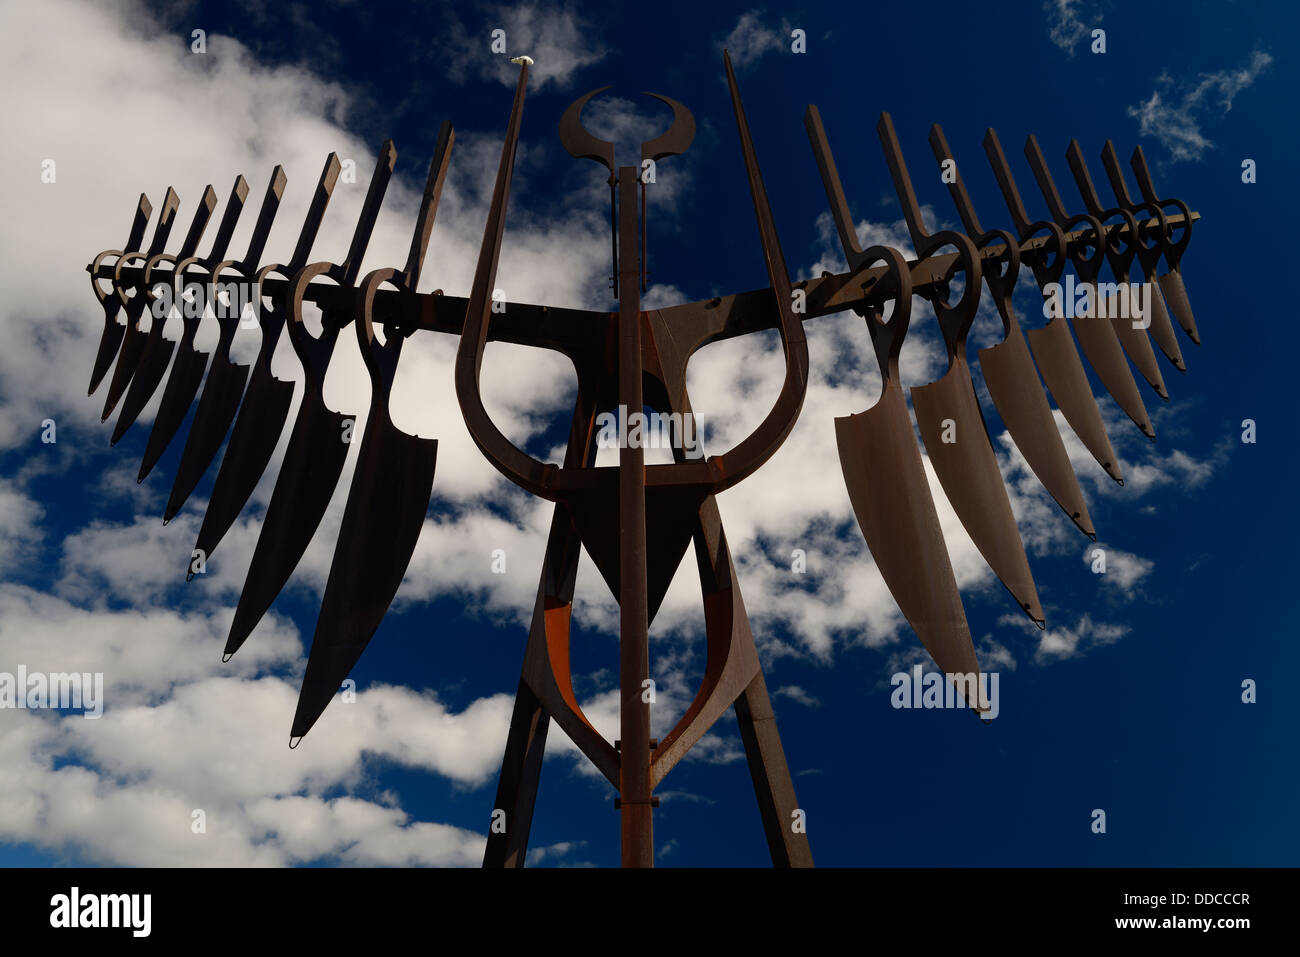 Morning sun on Spirit Catcher sculpture in Barrie Ontario Canada against a blue sky with clouds Stock Photo